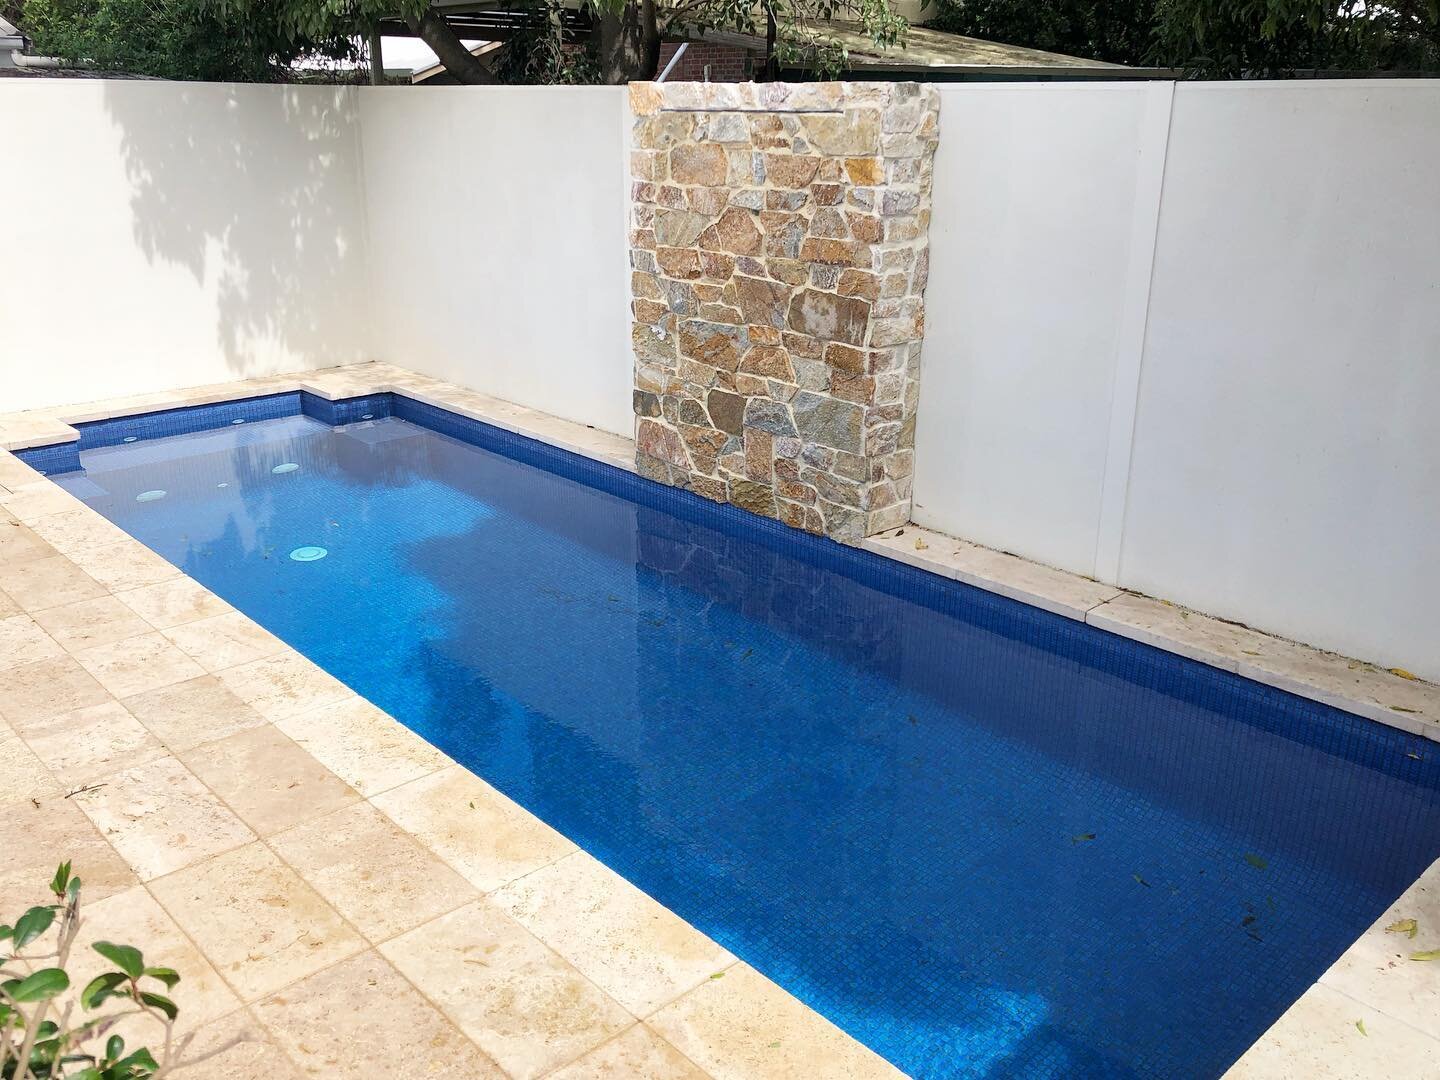 ~7.5 x 2.5 pool with a hydrotherapy seat ✔️
~Travertine coping ✔️
~23 x 23 sea breeze mosaics ✔️
~Coolum stone water feature with a cascading blade ✔️
Summer couldn&rsquo;t come sooner 💦☀️